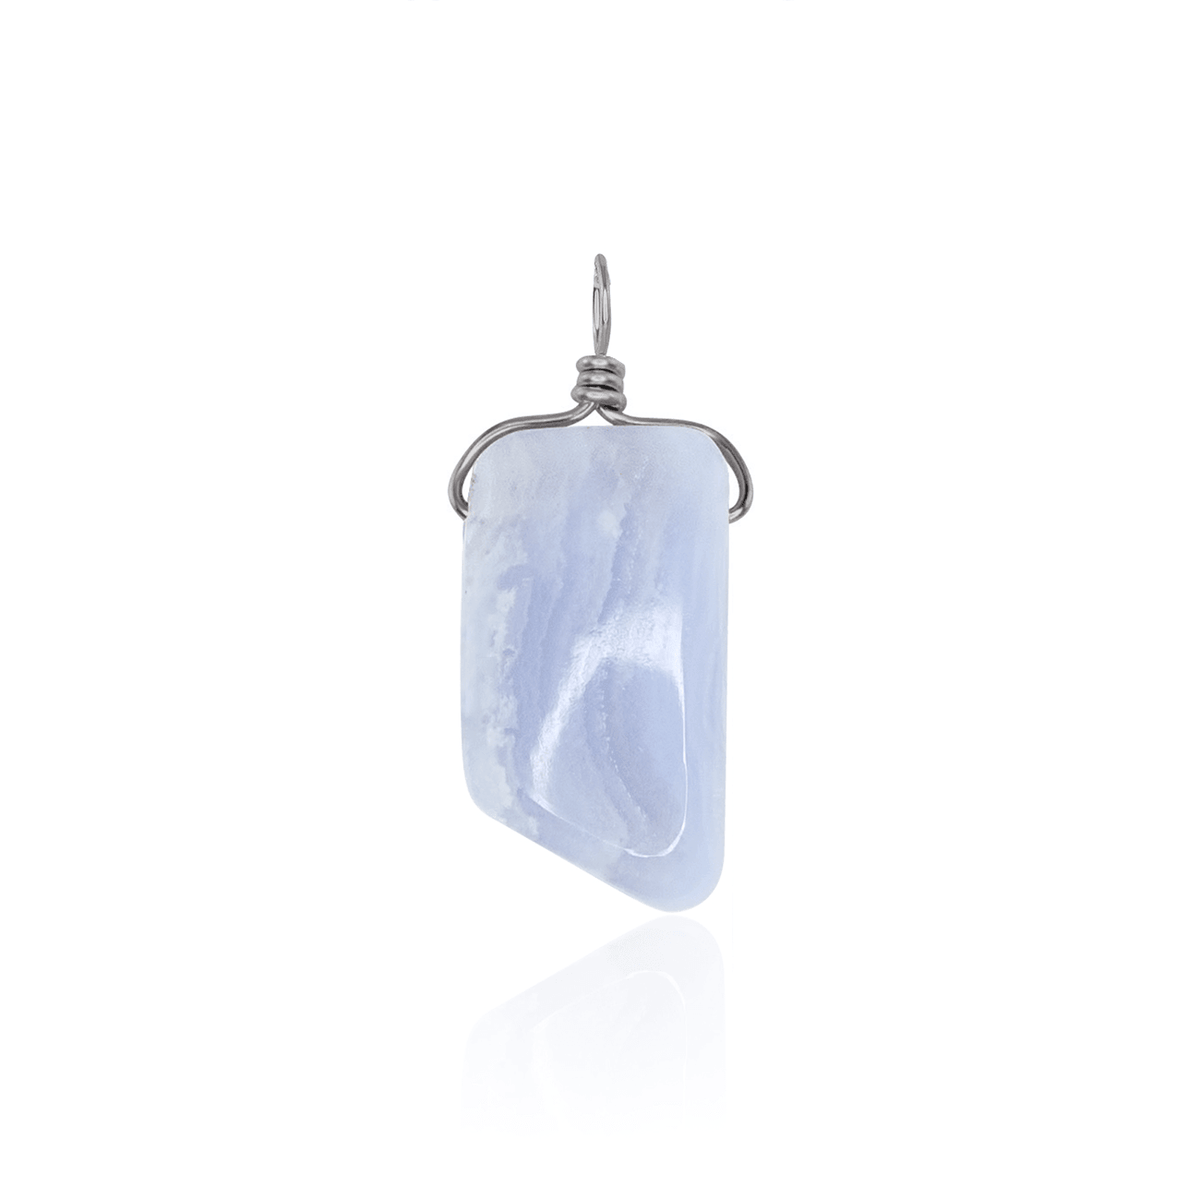 Small Smooth Blue Lace Agate Crystal Pendant with Gentle Point - Small Smooth Blue Lace Agate Crystal Pendant with Gentle Point - Stainless Steel - Luna Tide Handmade Crystal Jewellery